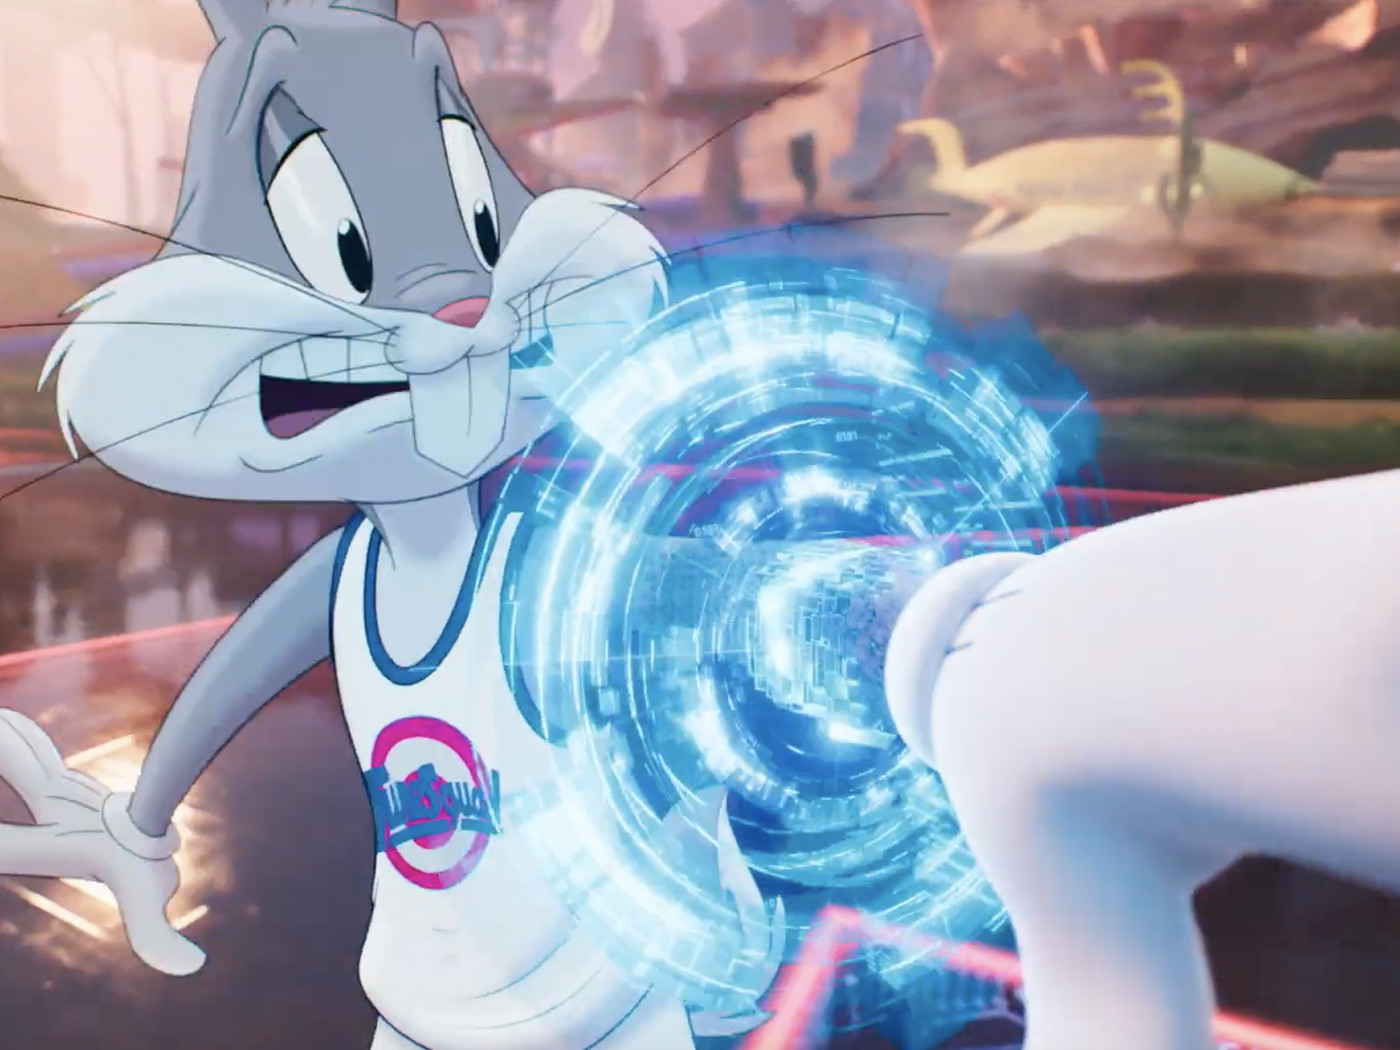 Space Jam 2 trailer: LeBron James and Bugs are back in (3D) action